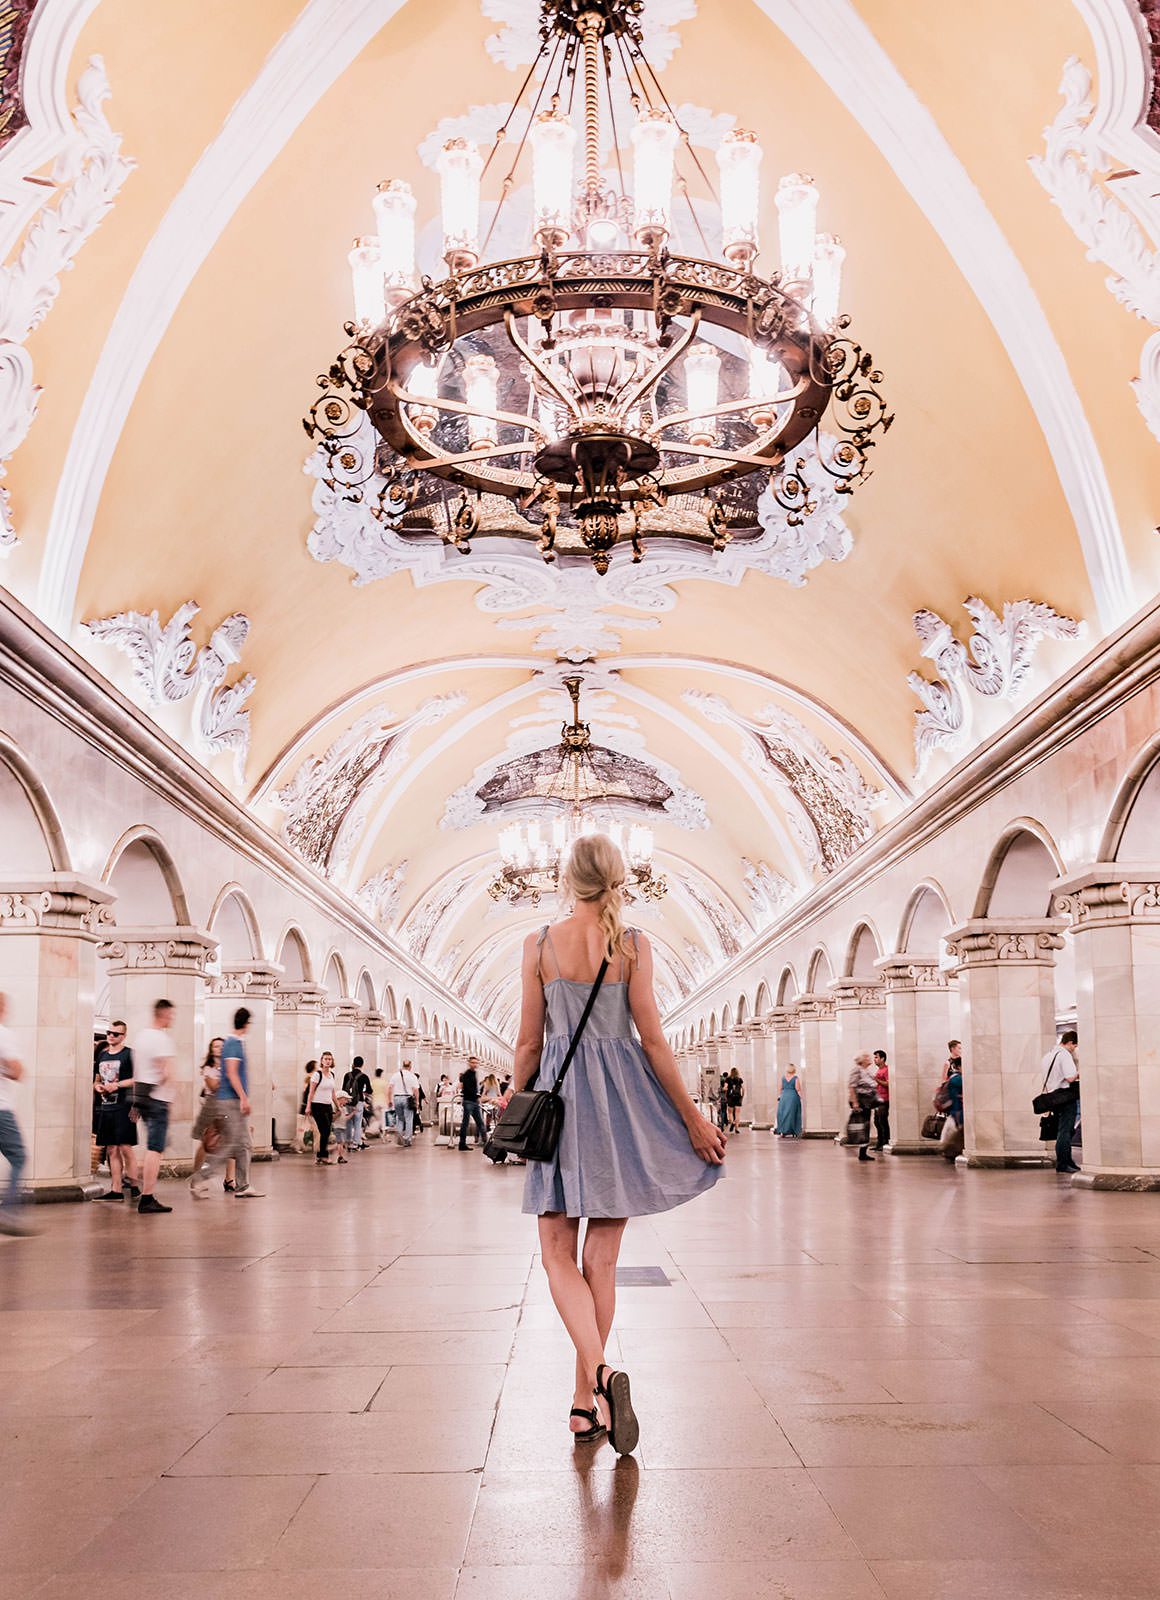 The Most Magical Places to see in Moscow, Russia